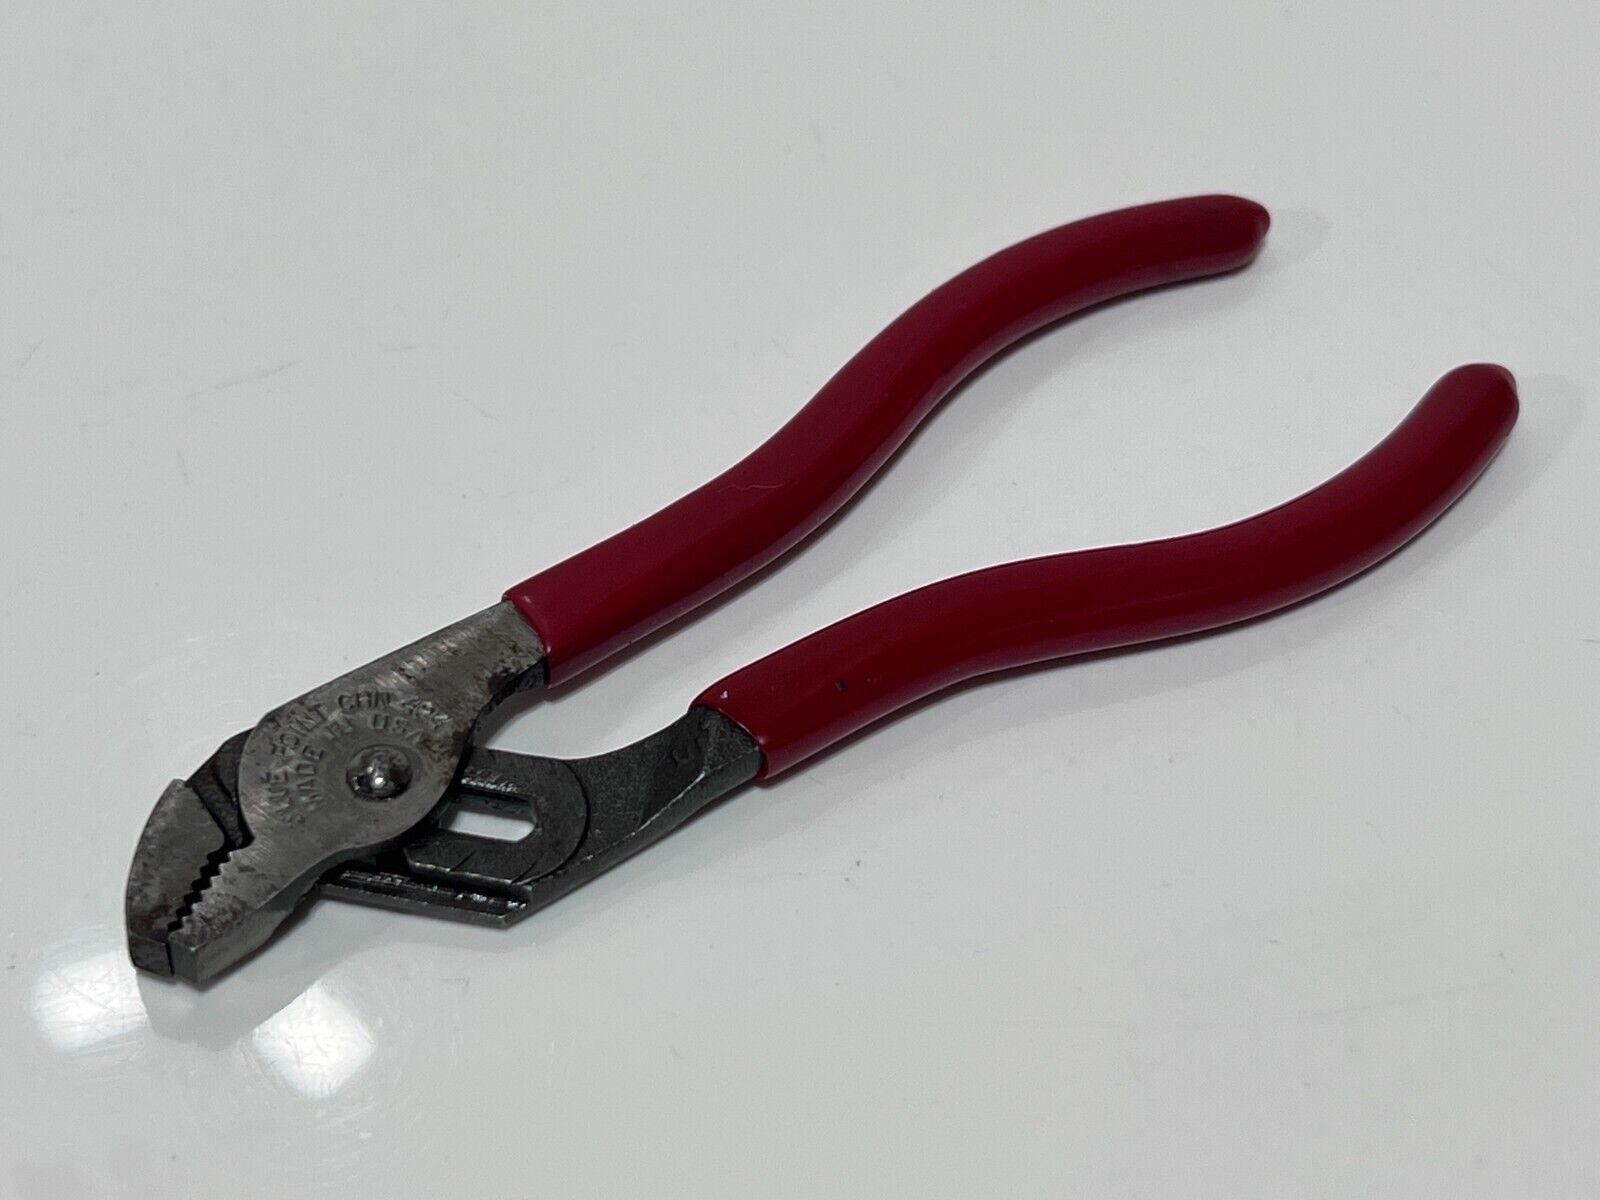 Blue Point USA Mini Micro Adjustable Pliers CHN424 for sale online